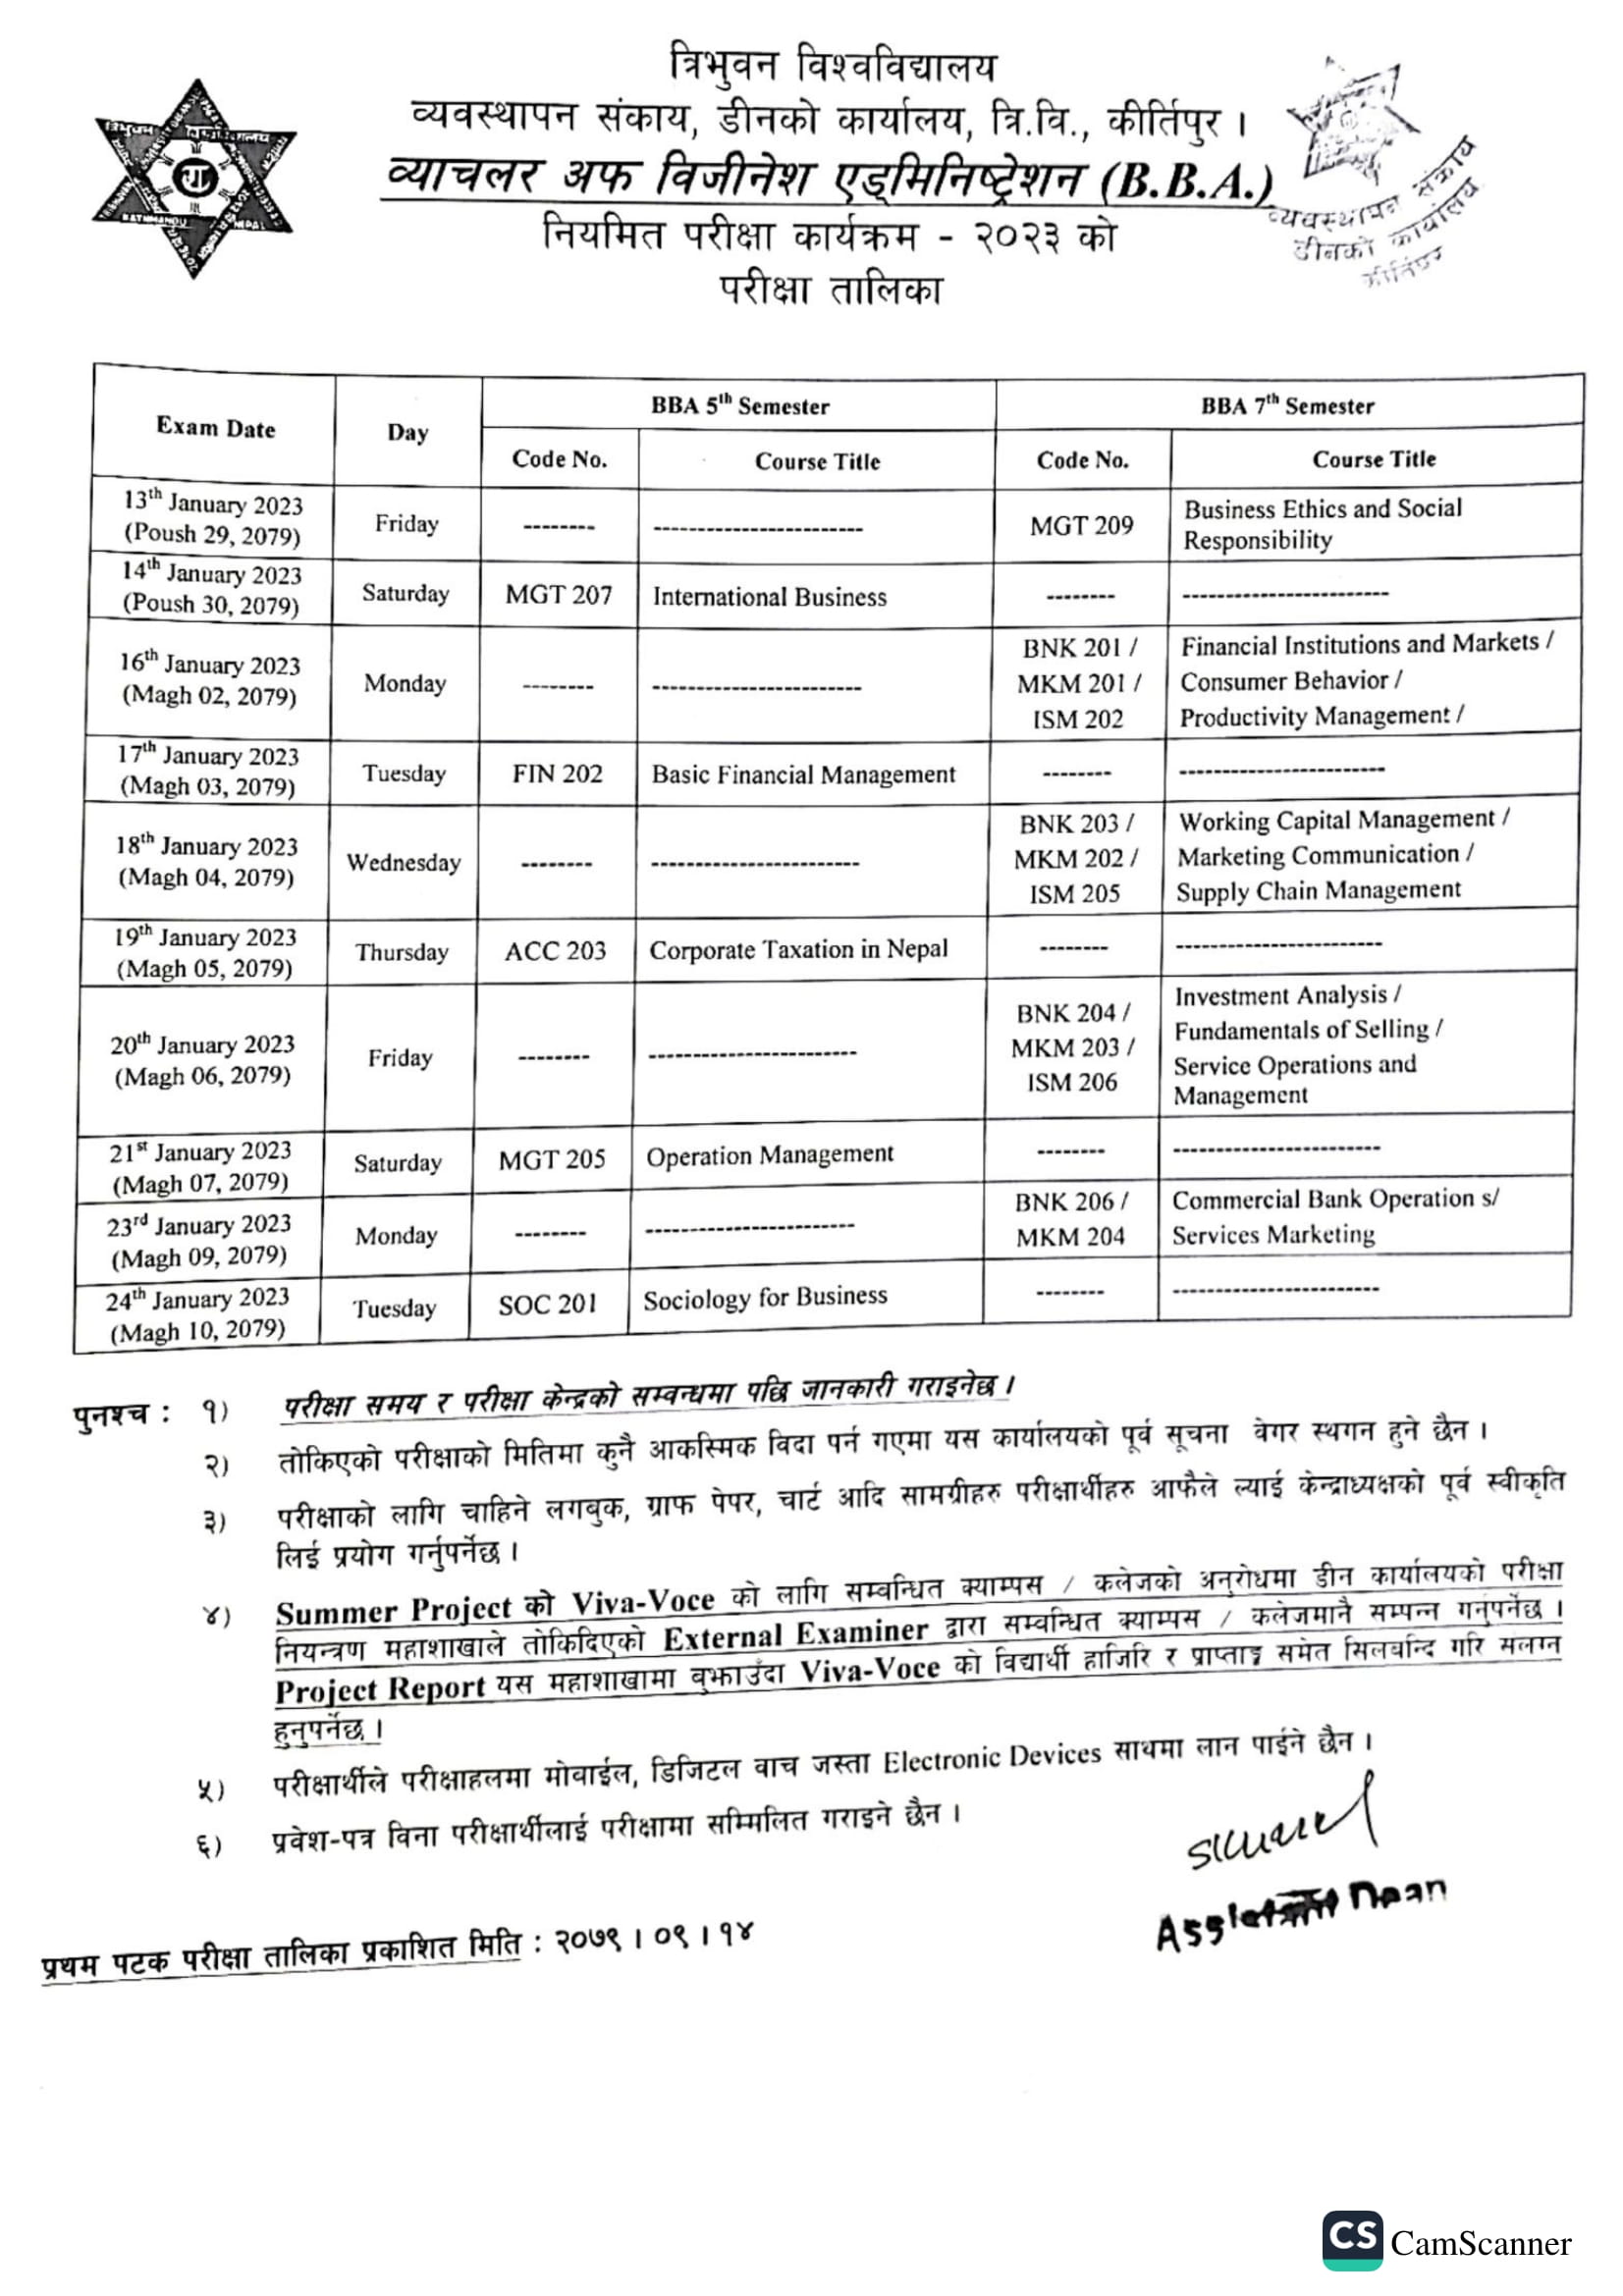 Tribhuvan University Faculty of Management, Dean's Office, TU, Kirtipur has published the examination schedule for Bachelor of Business Administration (BBA) 5th semester regular examination program 2023.